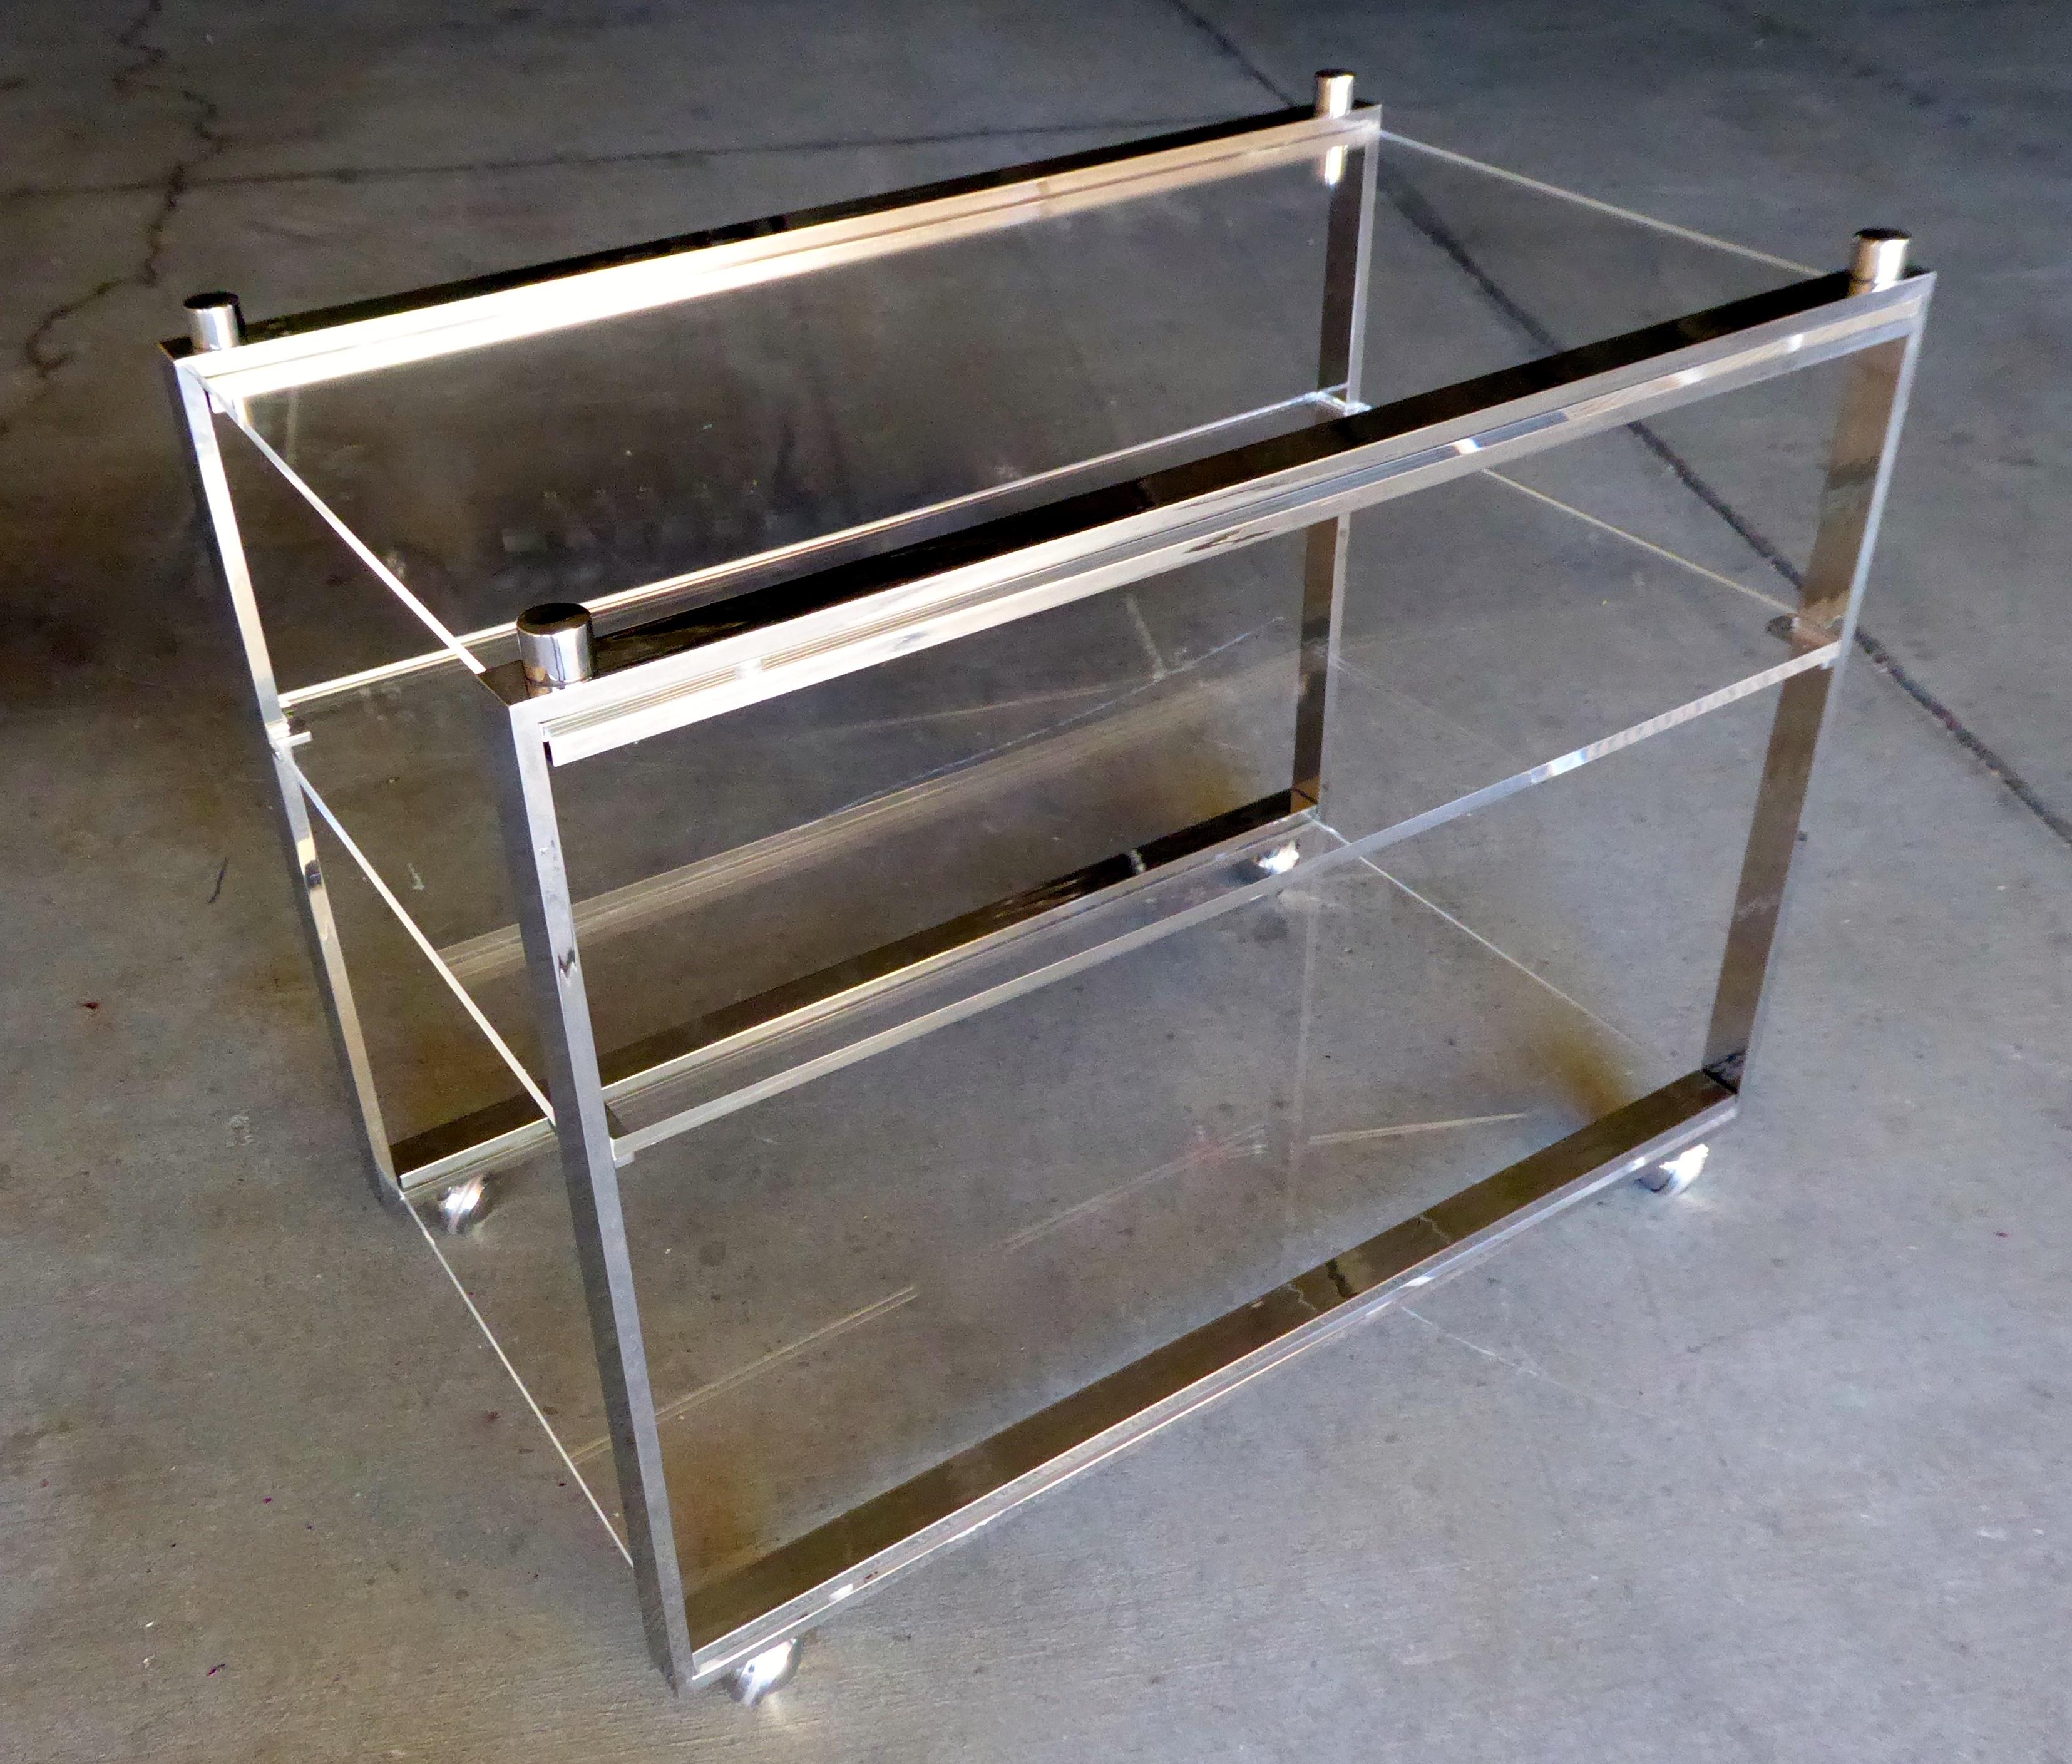 A chrome-plated steel and Lucite three-level serving cart from the Box Line designed by Charles Hollis Jones for Hudson-Rissman, circa 1960s. This serving cart was created in 1968.